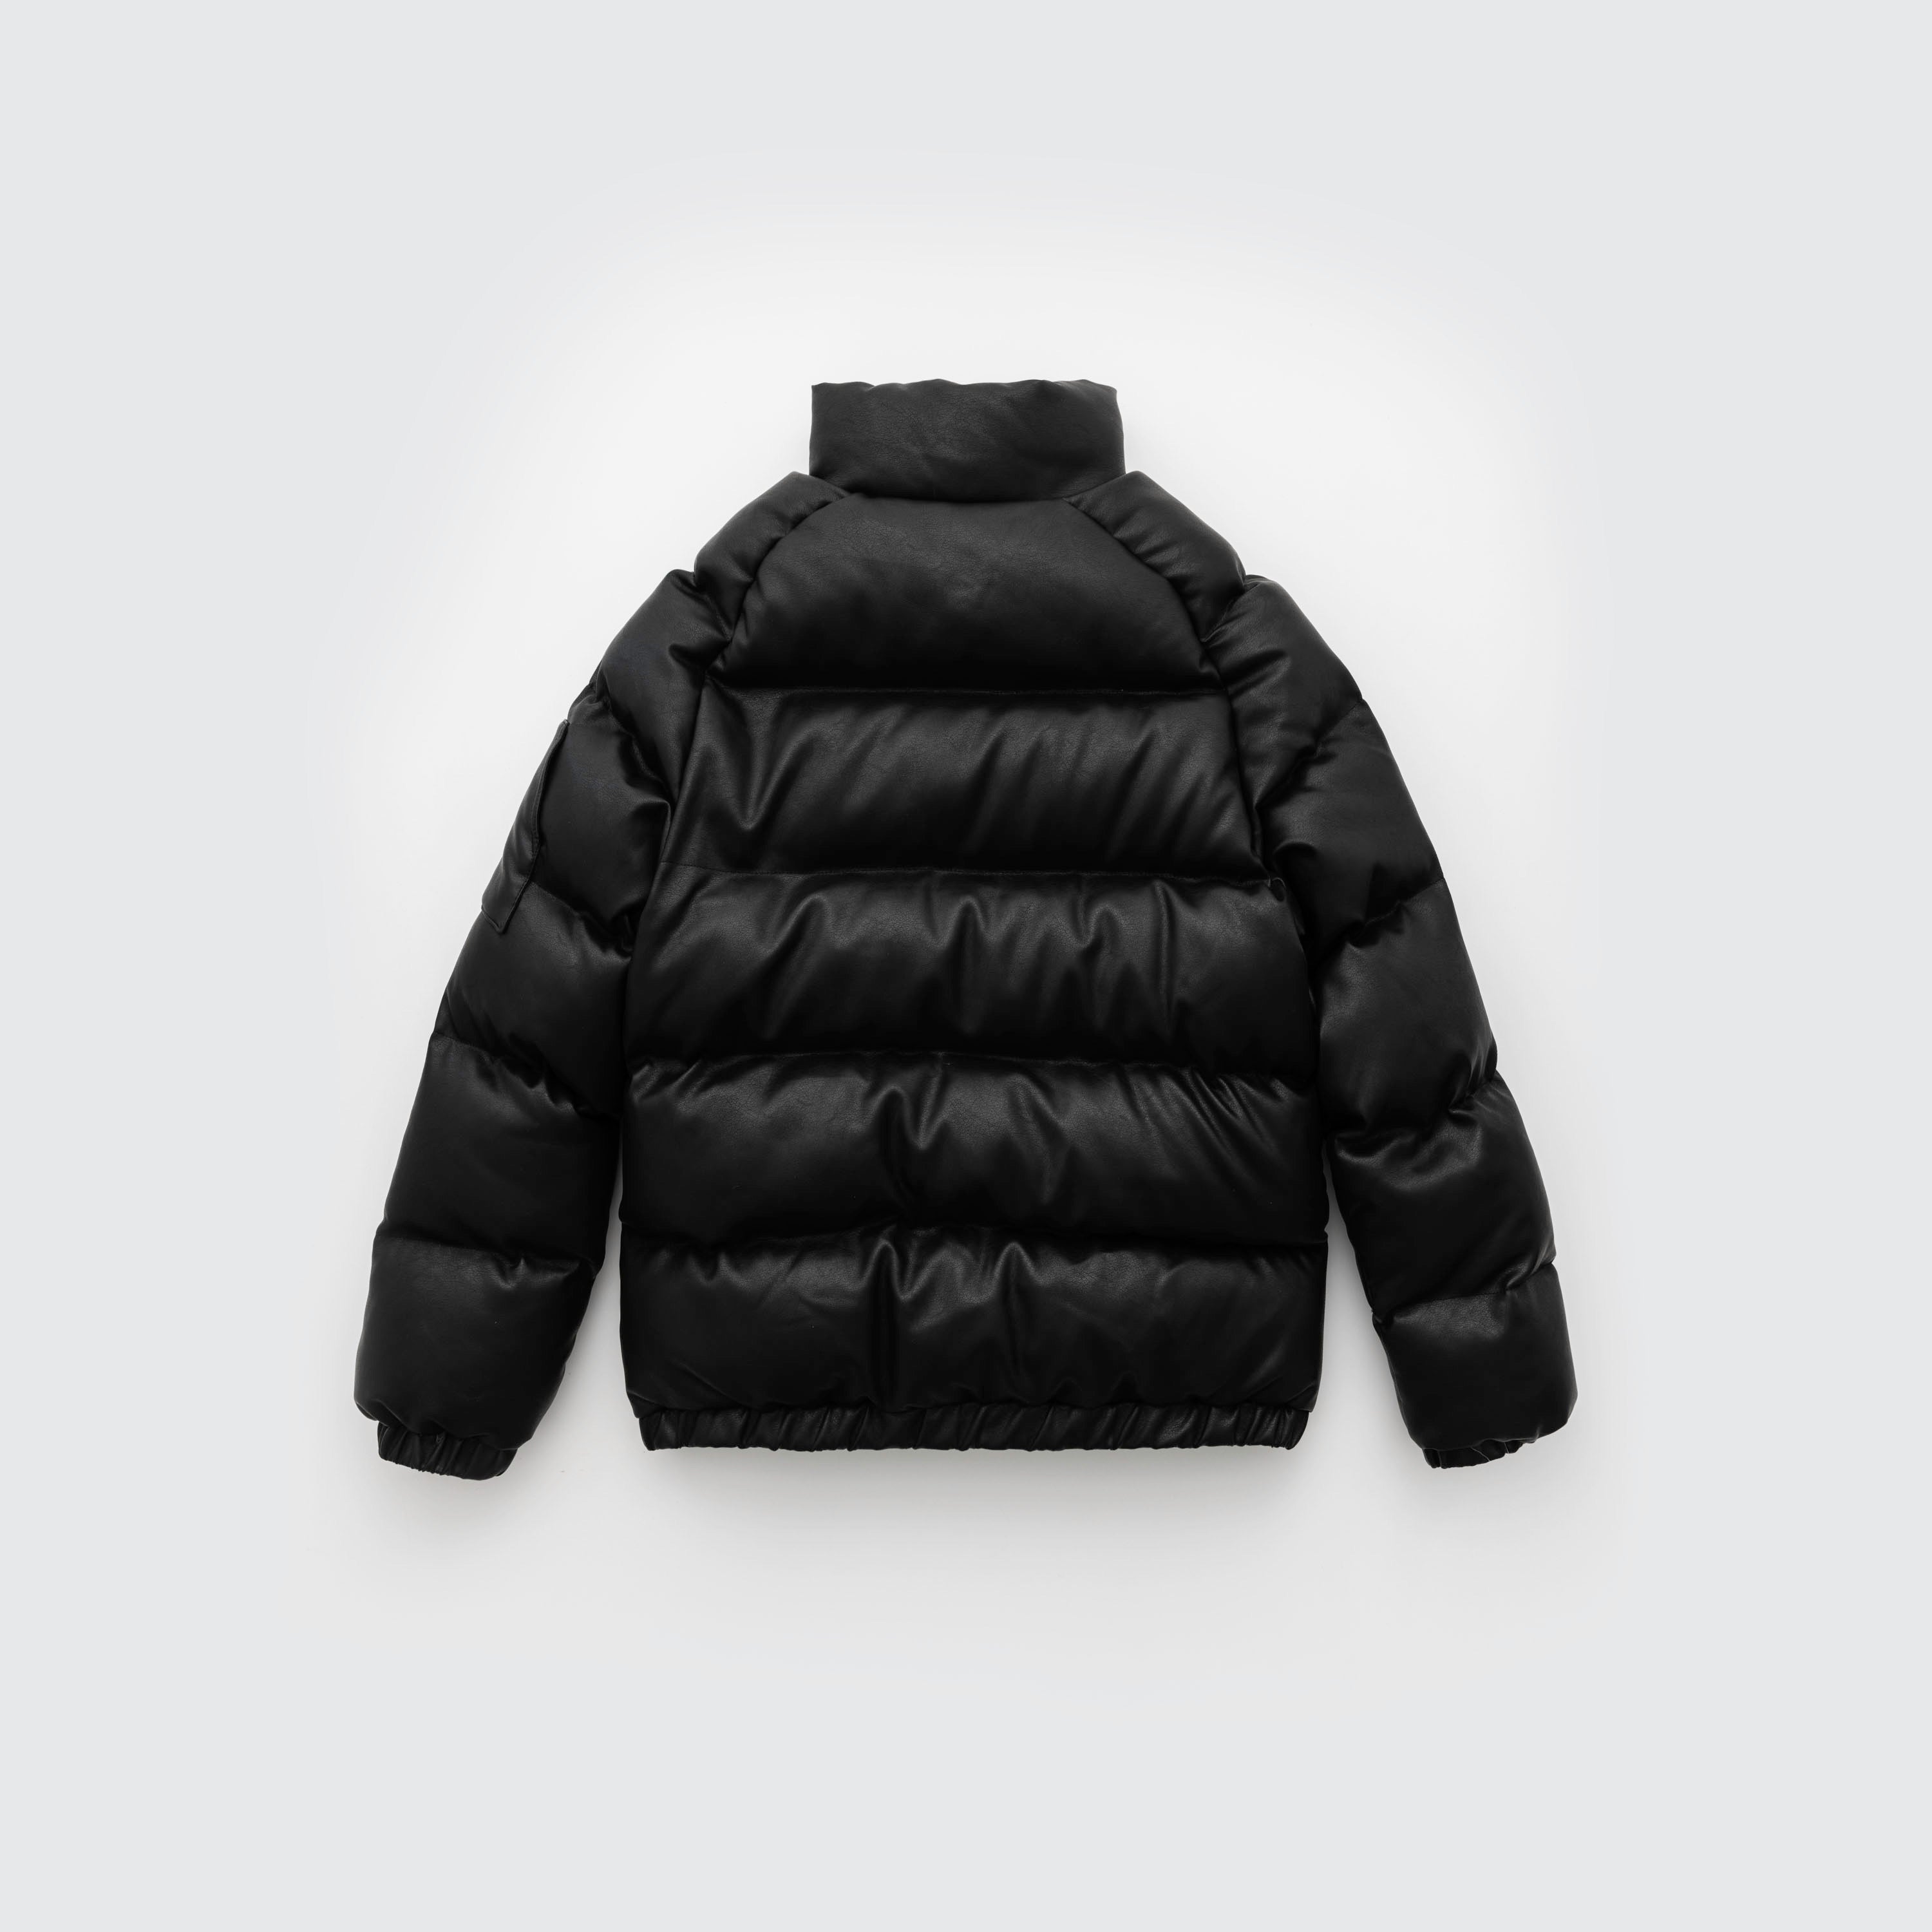 "Double R" Vegan Leather Puffer Jacket